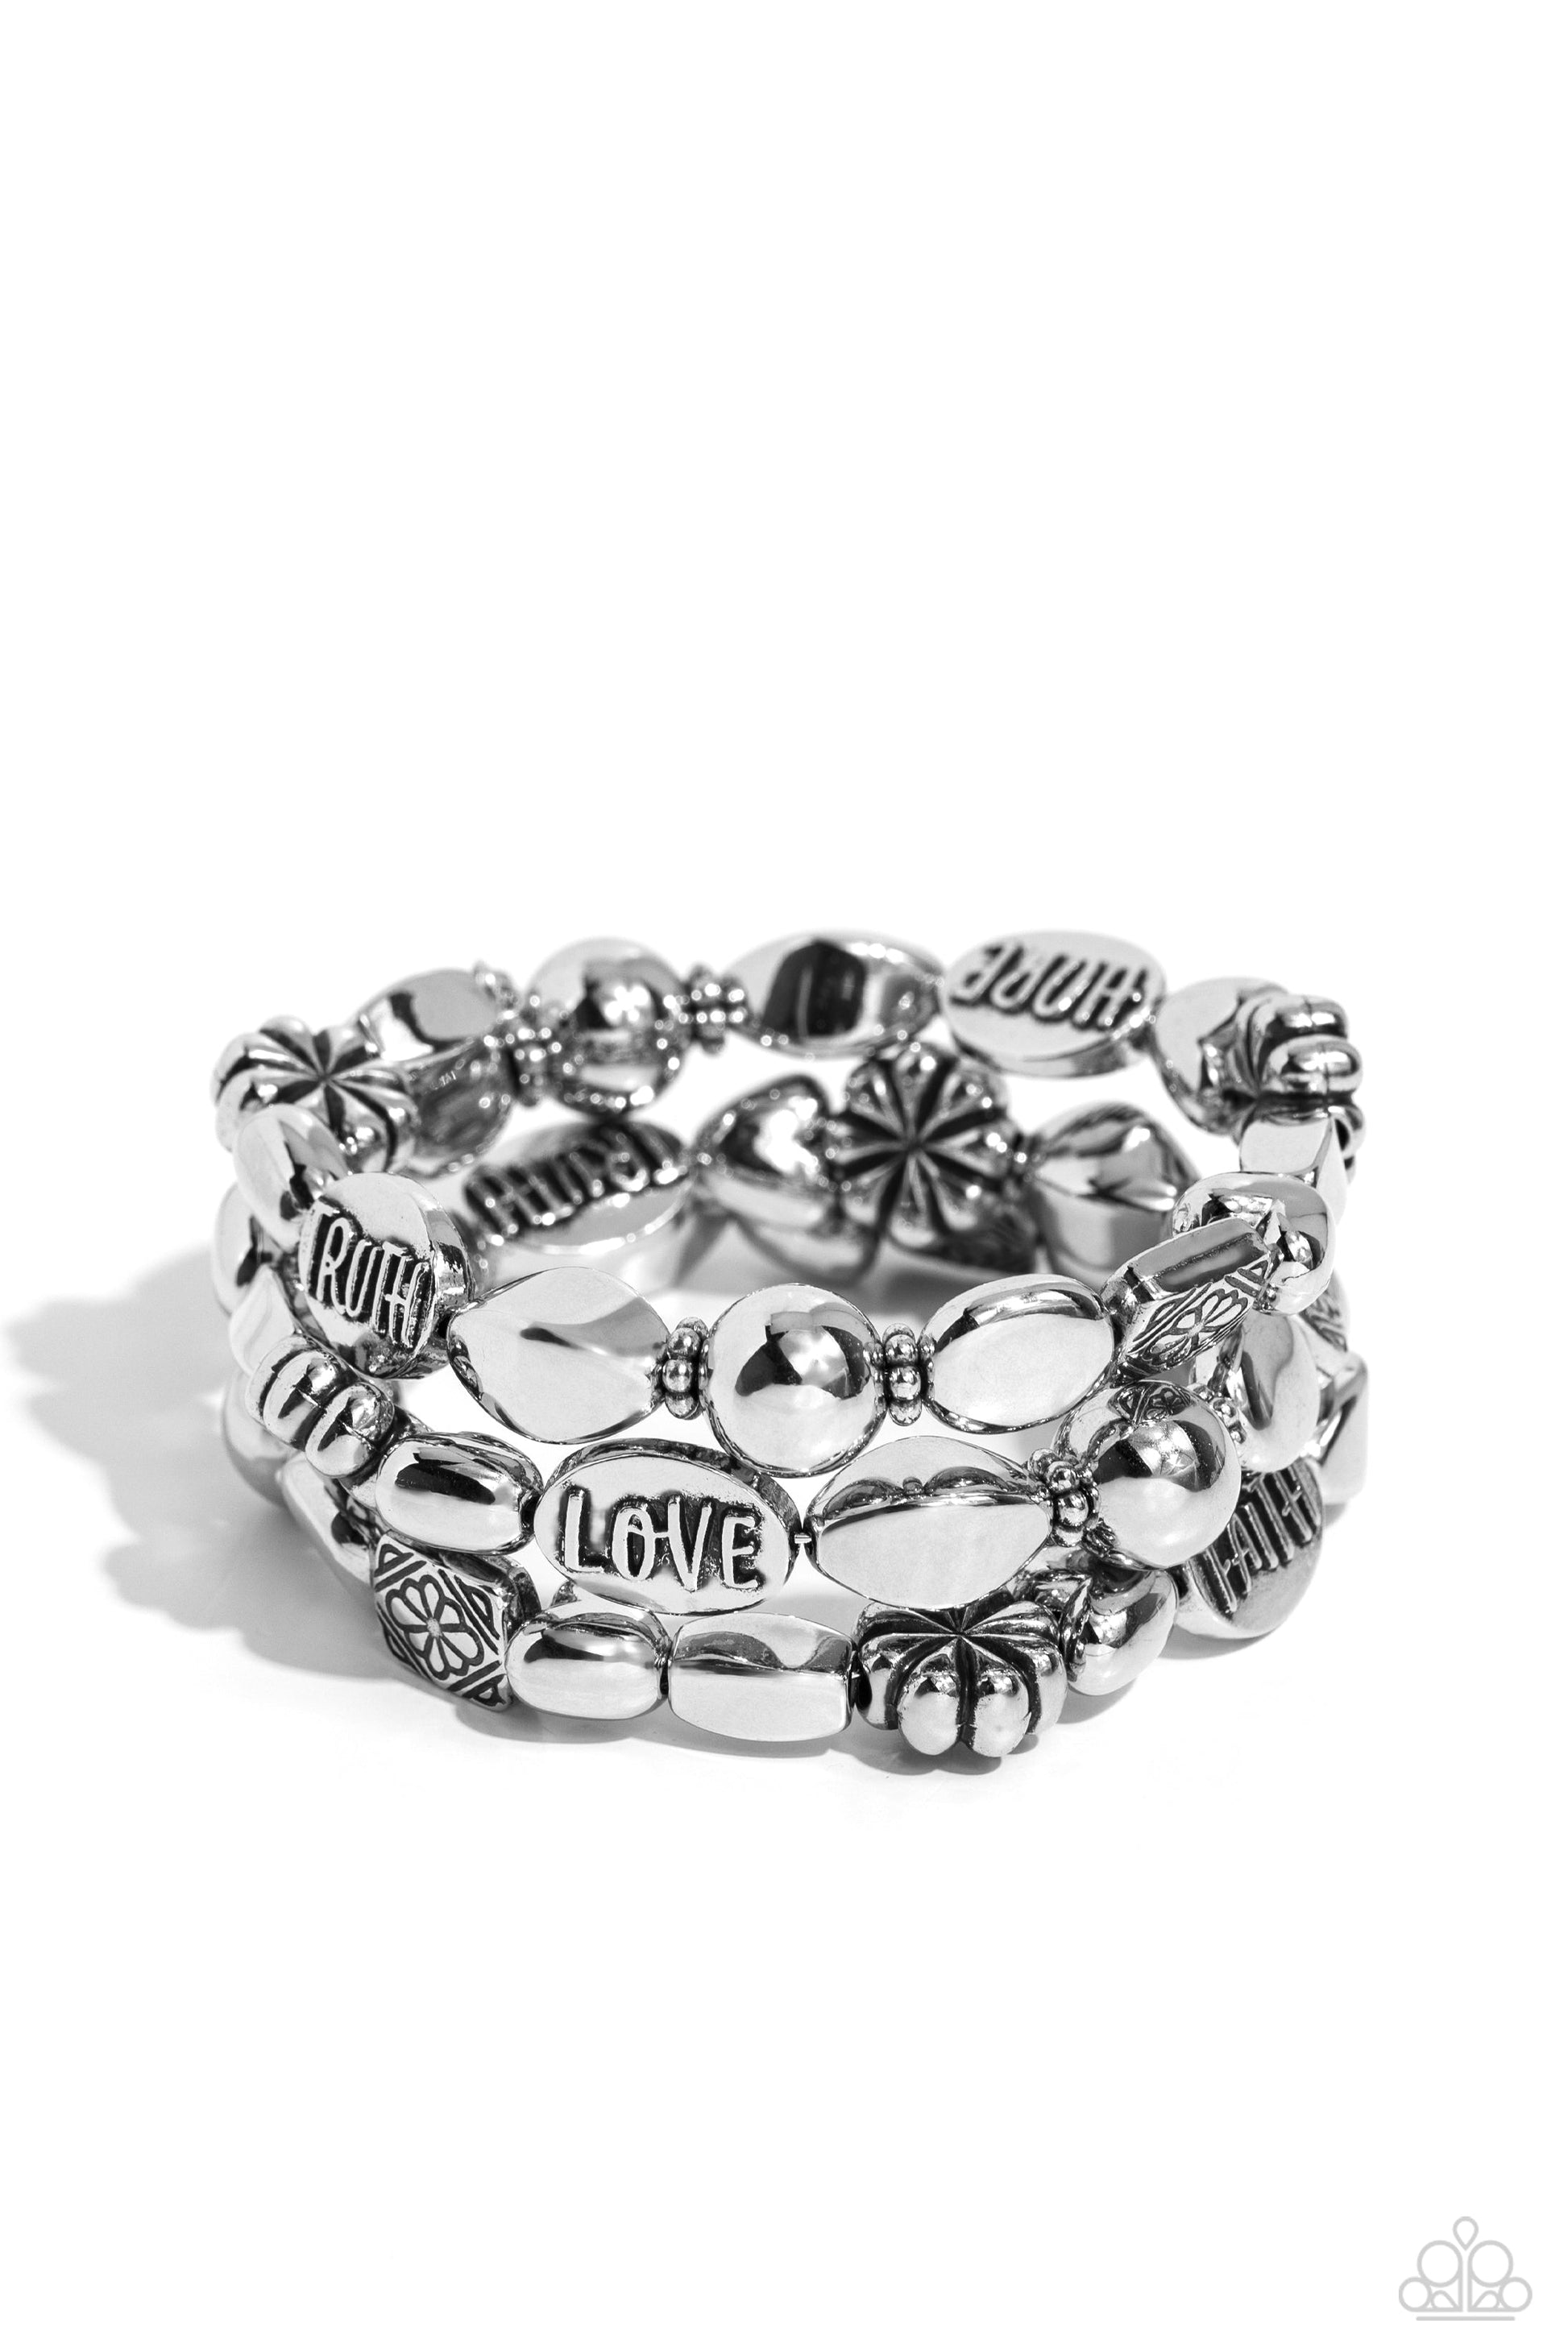 Enchanting Emotion - Silver Infinity Bracelet - Paparazzi Accessories - An enchanting assortment of shiny silver, faceted, and floral embossed beads alternate along a coiled wire, creating a whimsical infinity-style bracelet around the wrist. Additional oval silver beads featuring the words "FAITH," "HOPE," "TRUTH," and "LOVE" finish off the design with an inspirational finish.